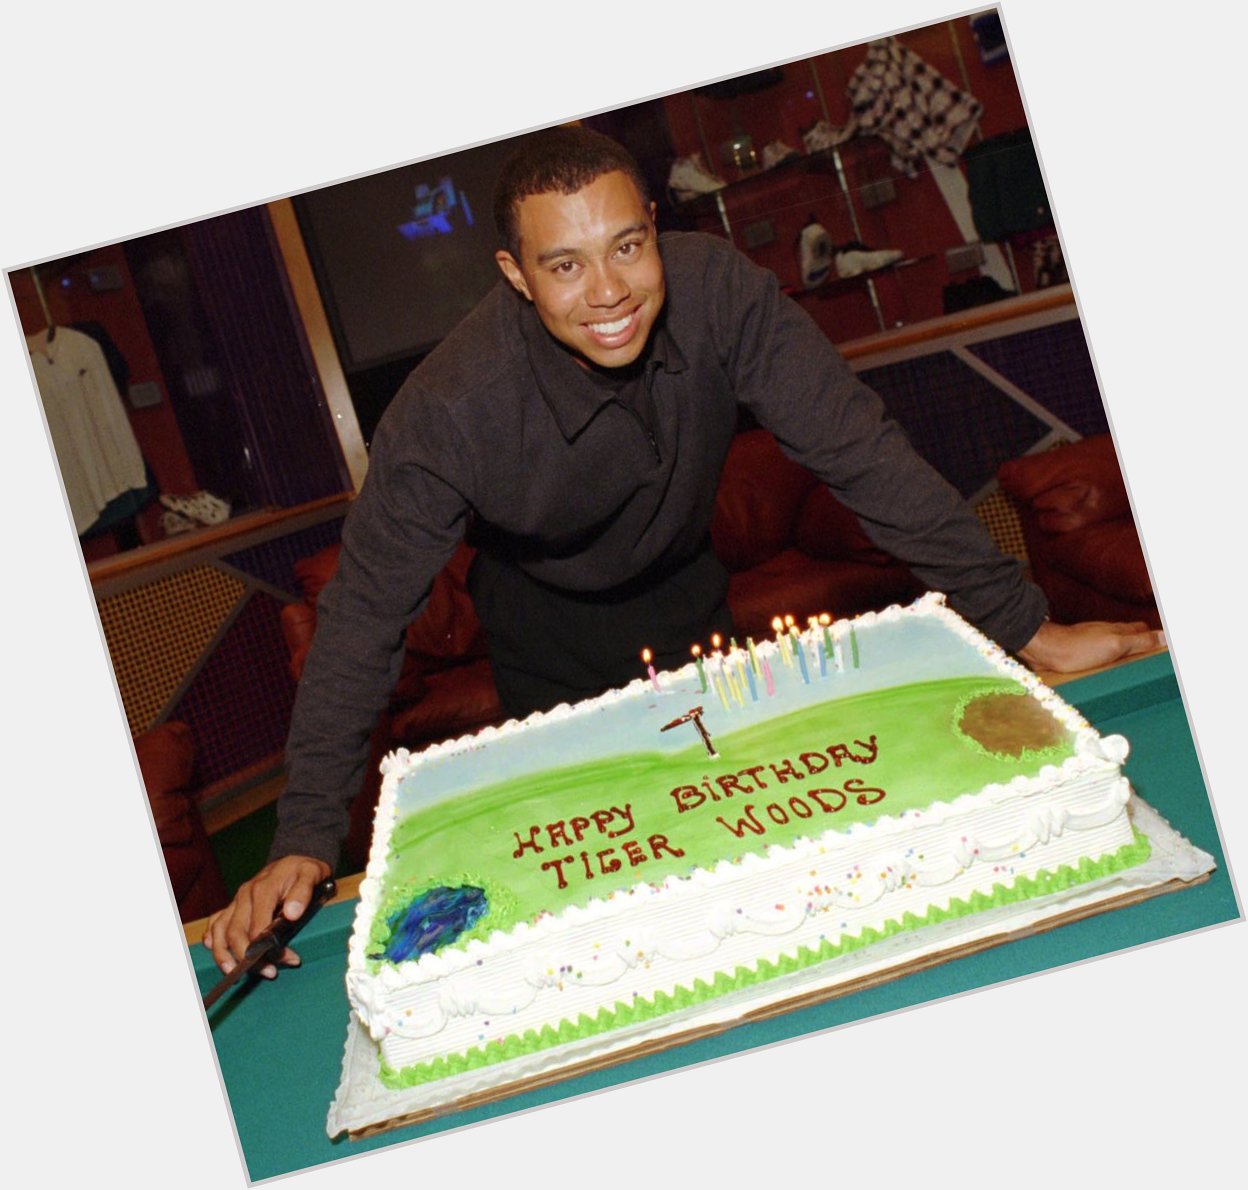 Happy 40th Birthday to Tiger Woods! 